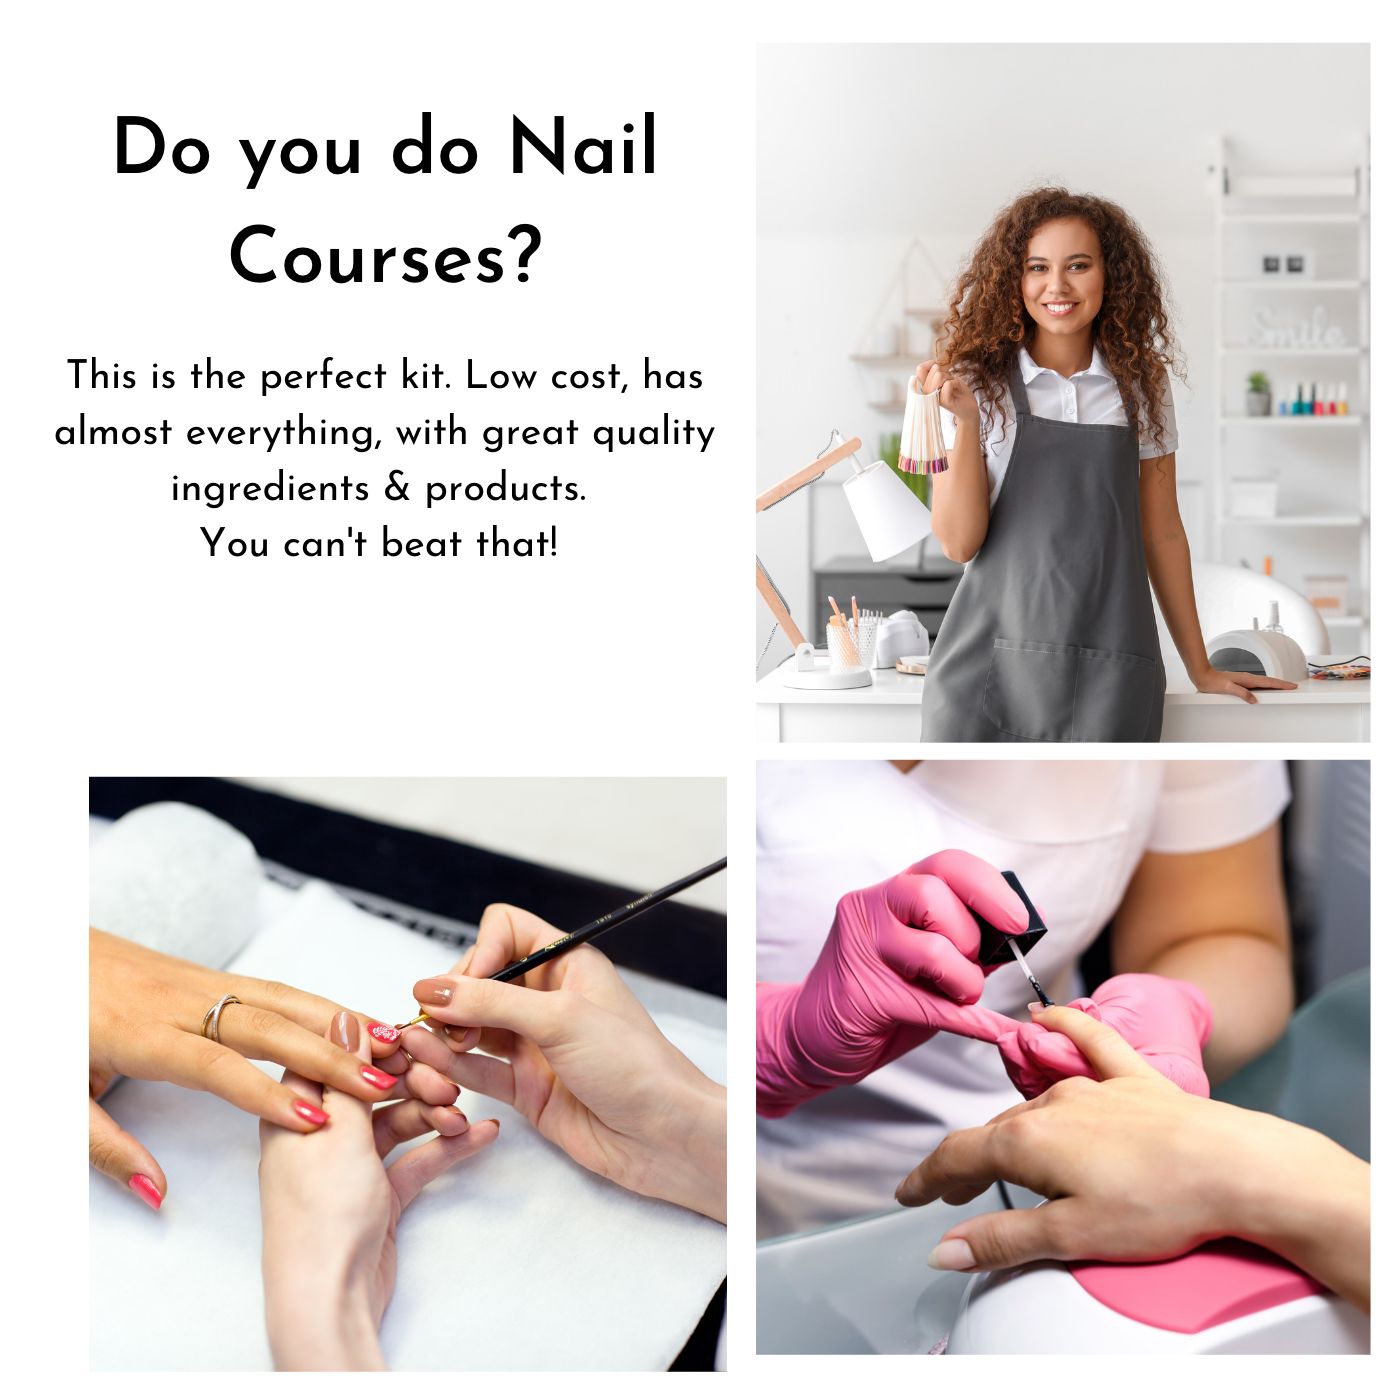 Nail Kit For Beginners | All you need!